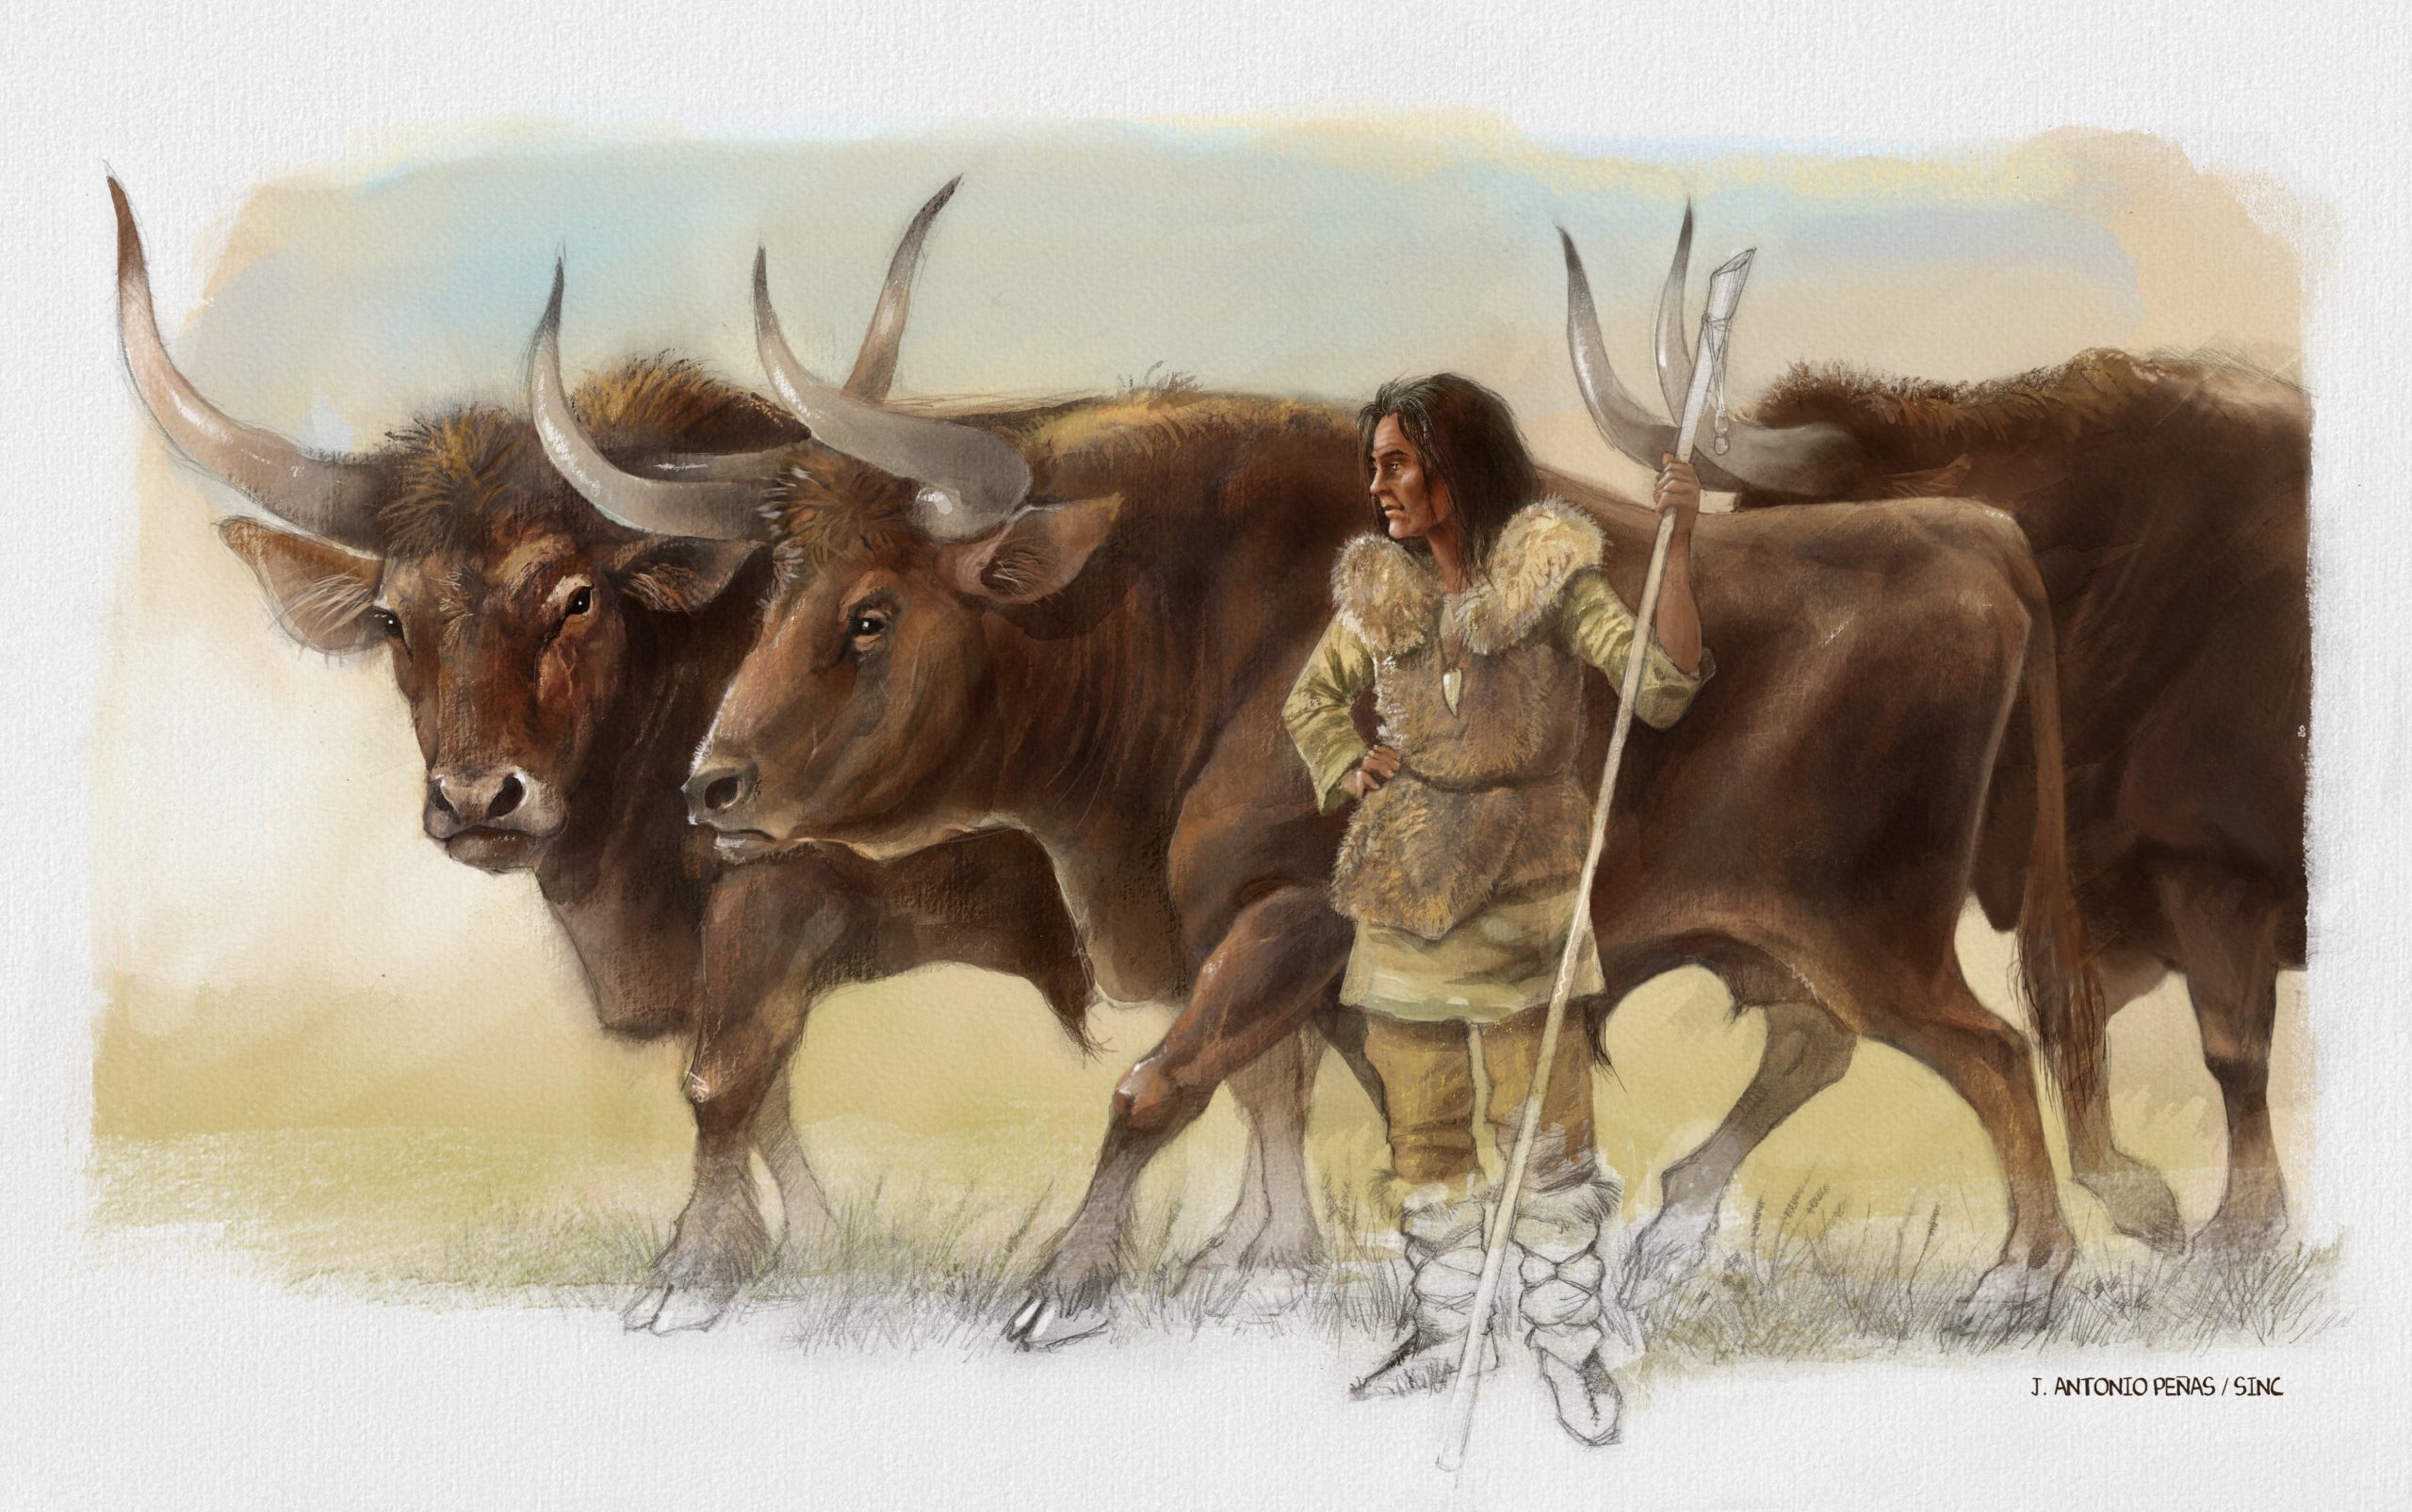 An artist's imagining of the Elba women with the three aurochs, whose bones were all found together in a Spanish cave. (Illustration: José Antonio Peñas (SINC))